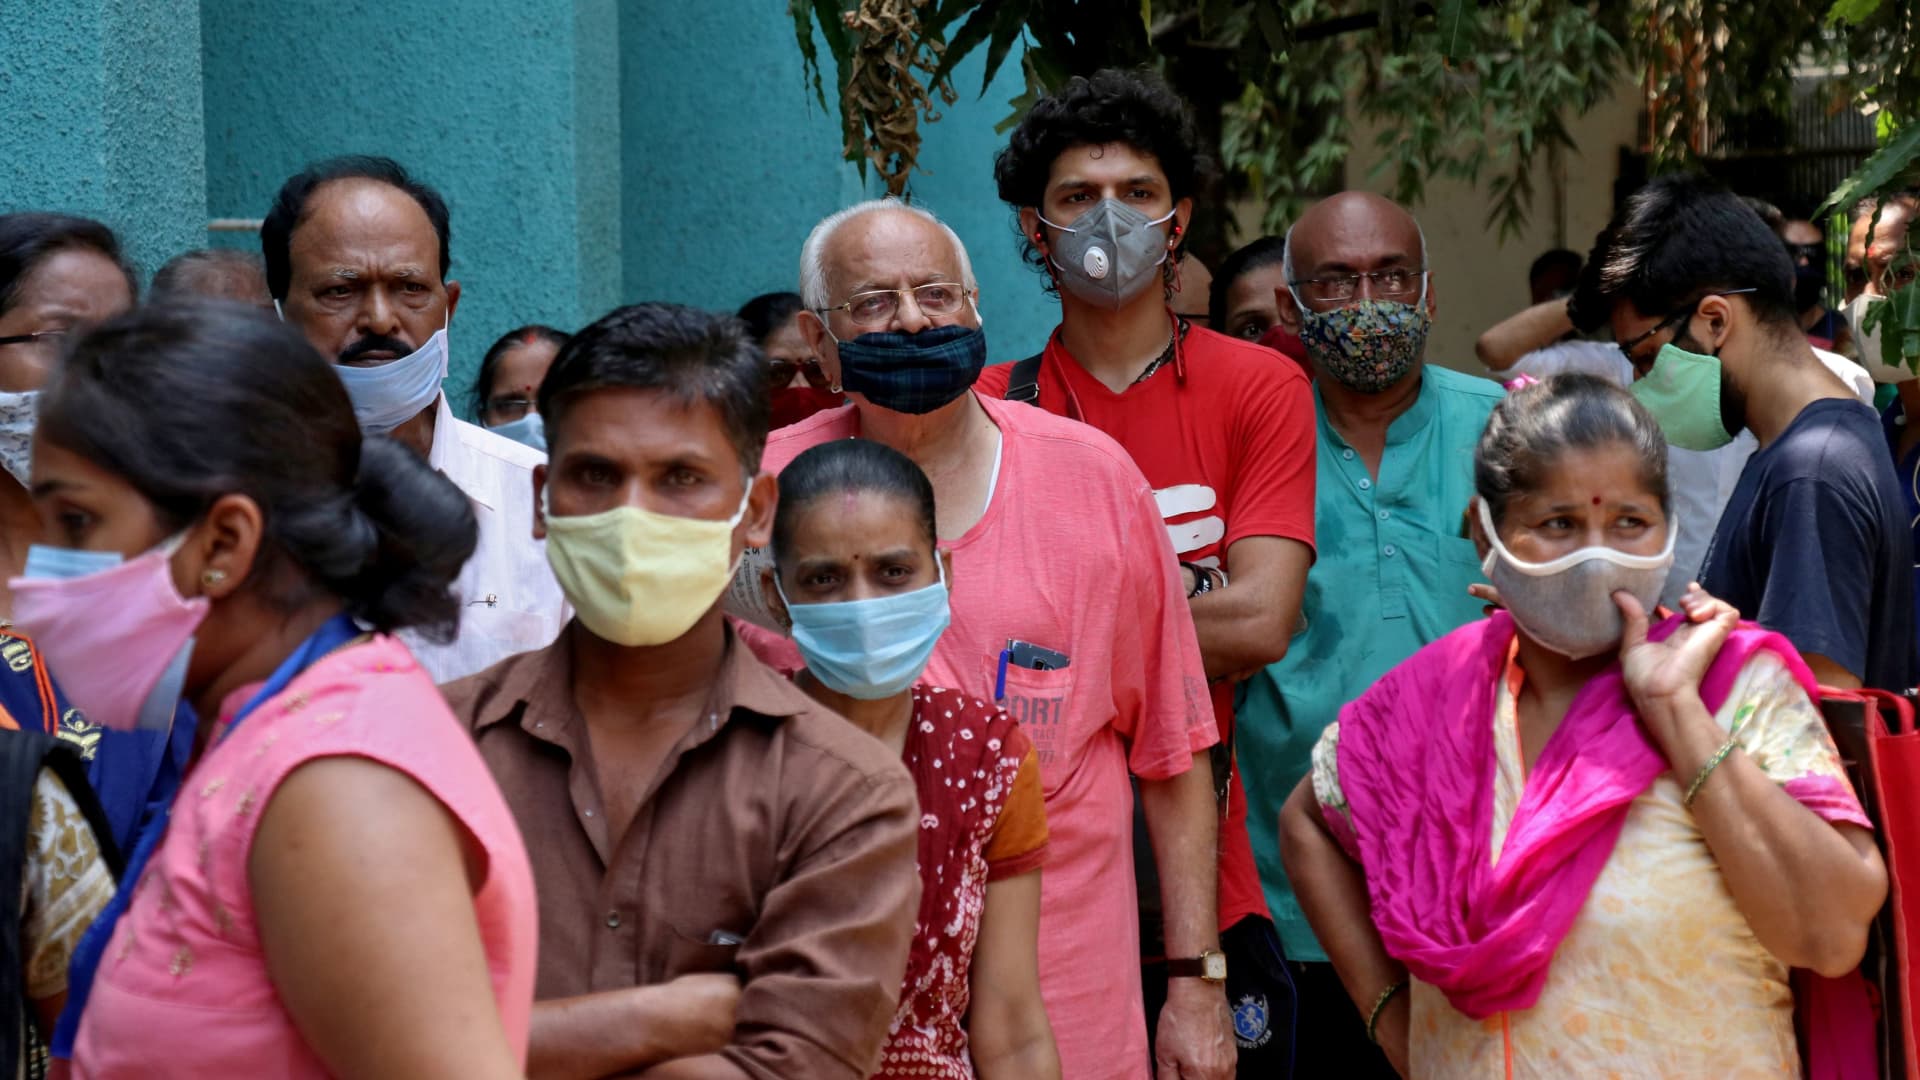 People wearing protective face masks wait to receive a vaccine against the coronavirus disease (COVID-19) at a vaccination centre in Mumbai, India, April 28, 2021.